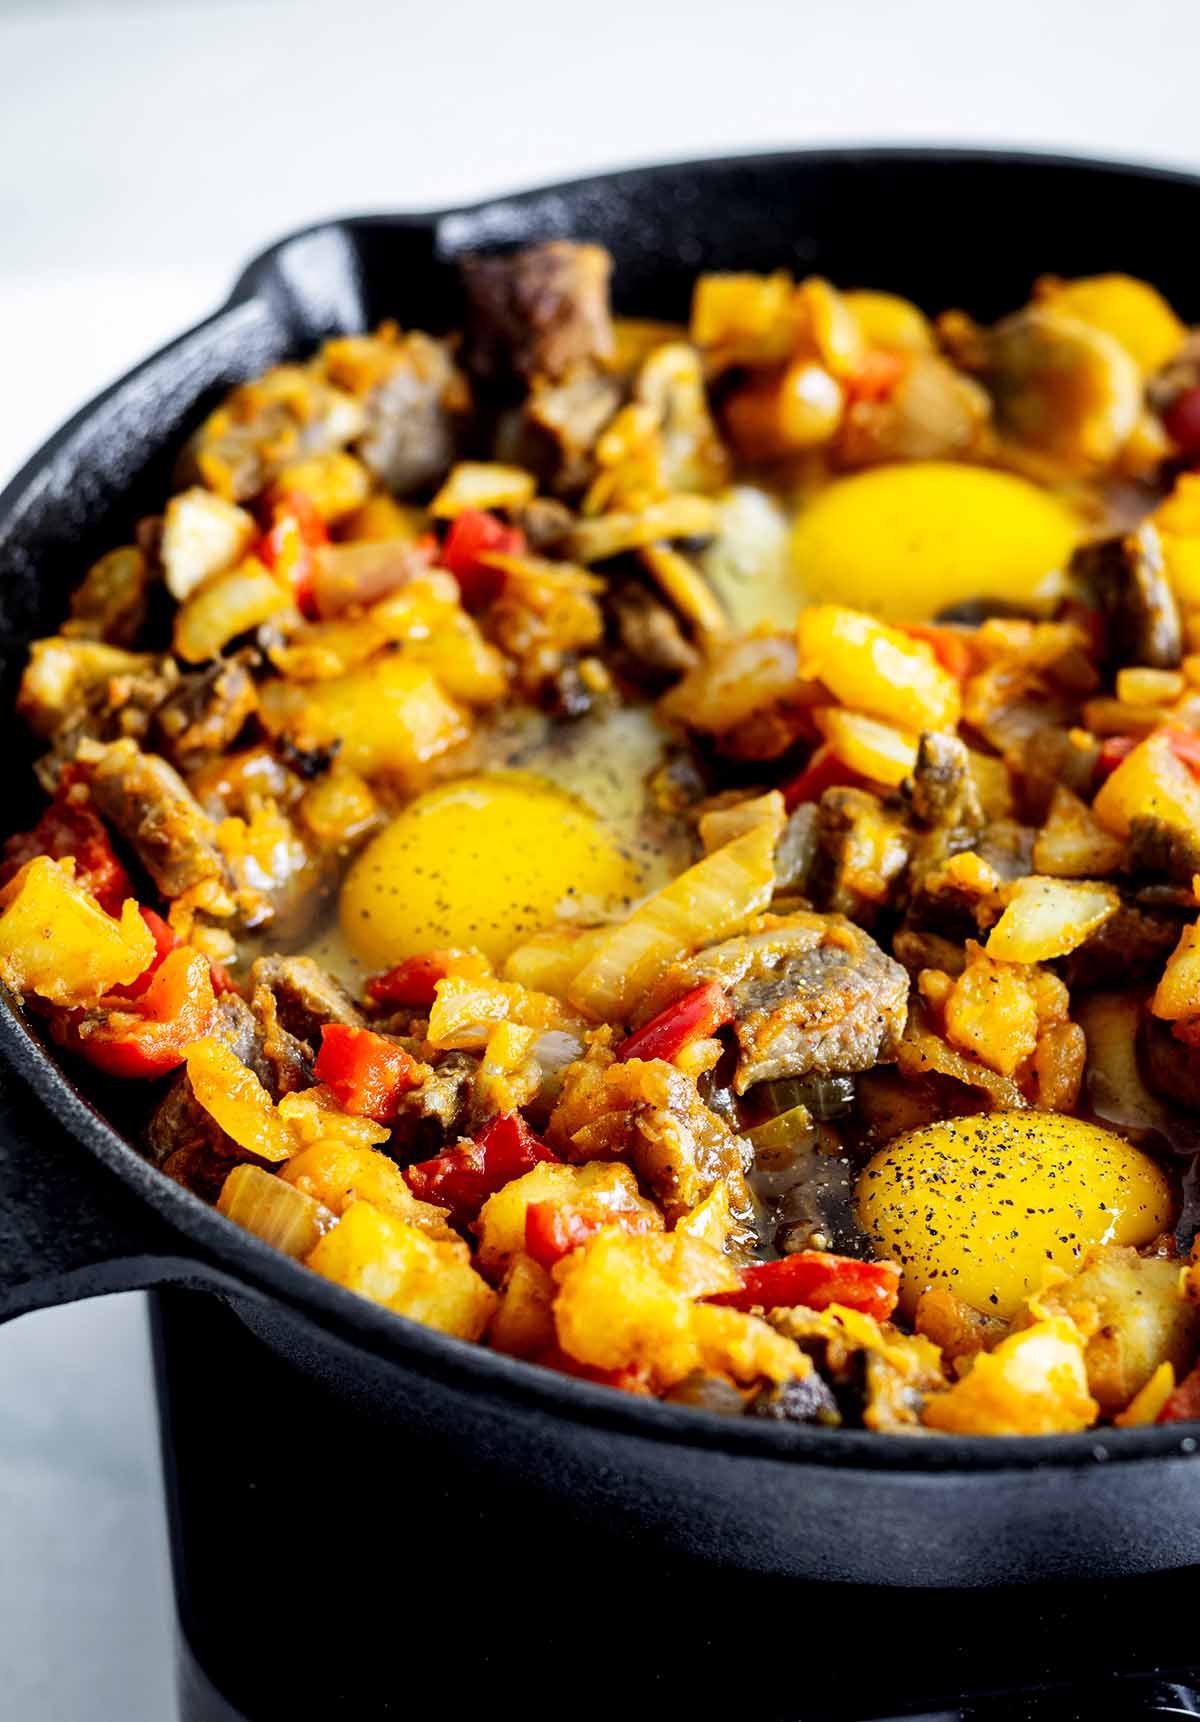 Raw eggs in skillet with steak and vegetables.